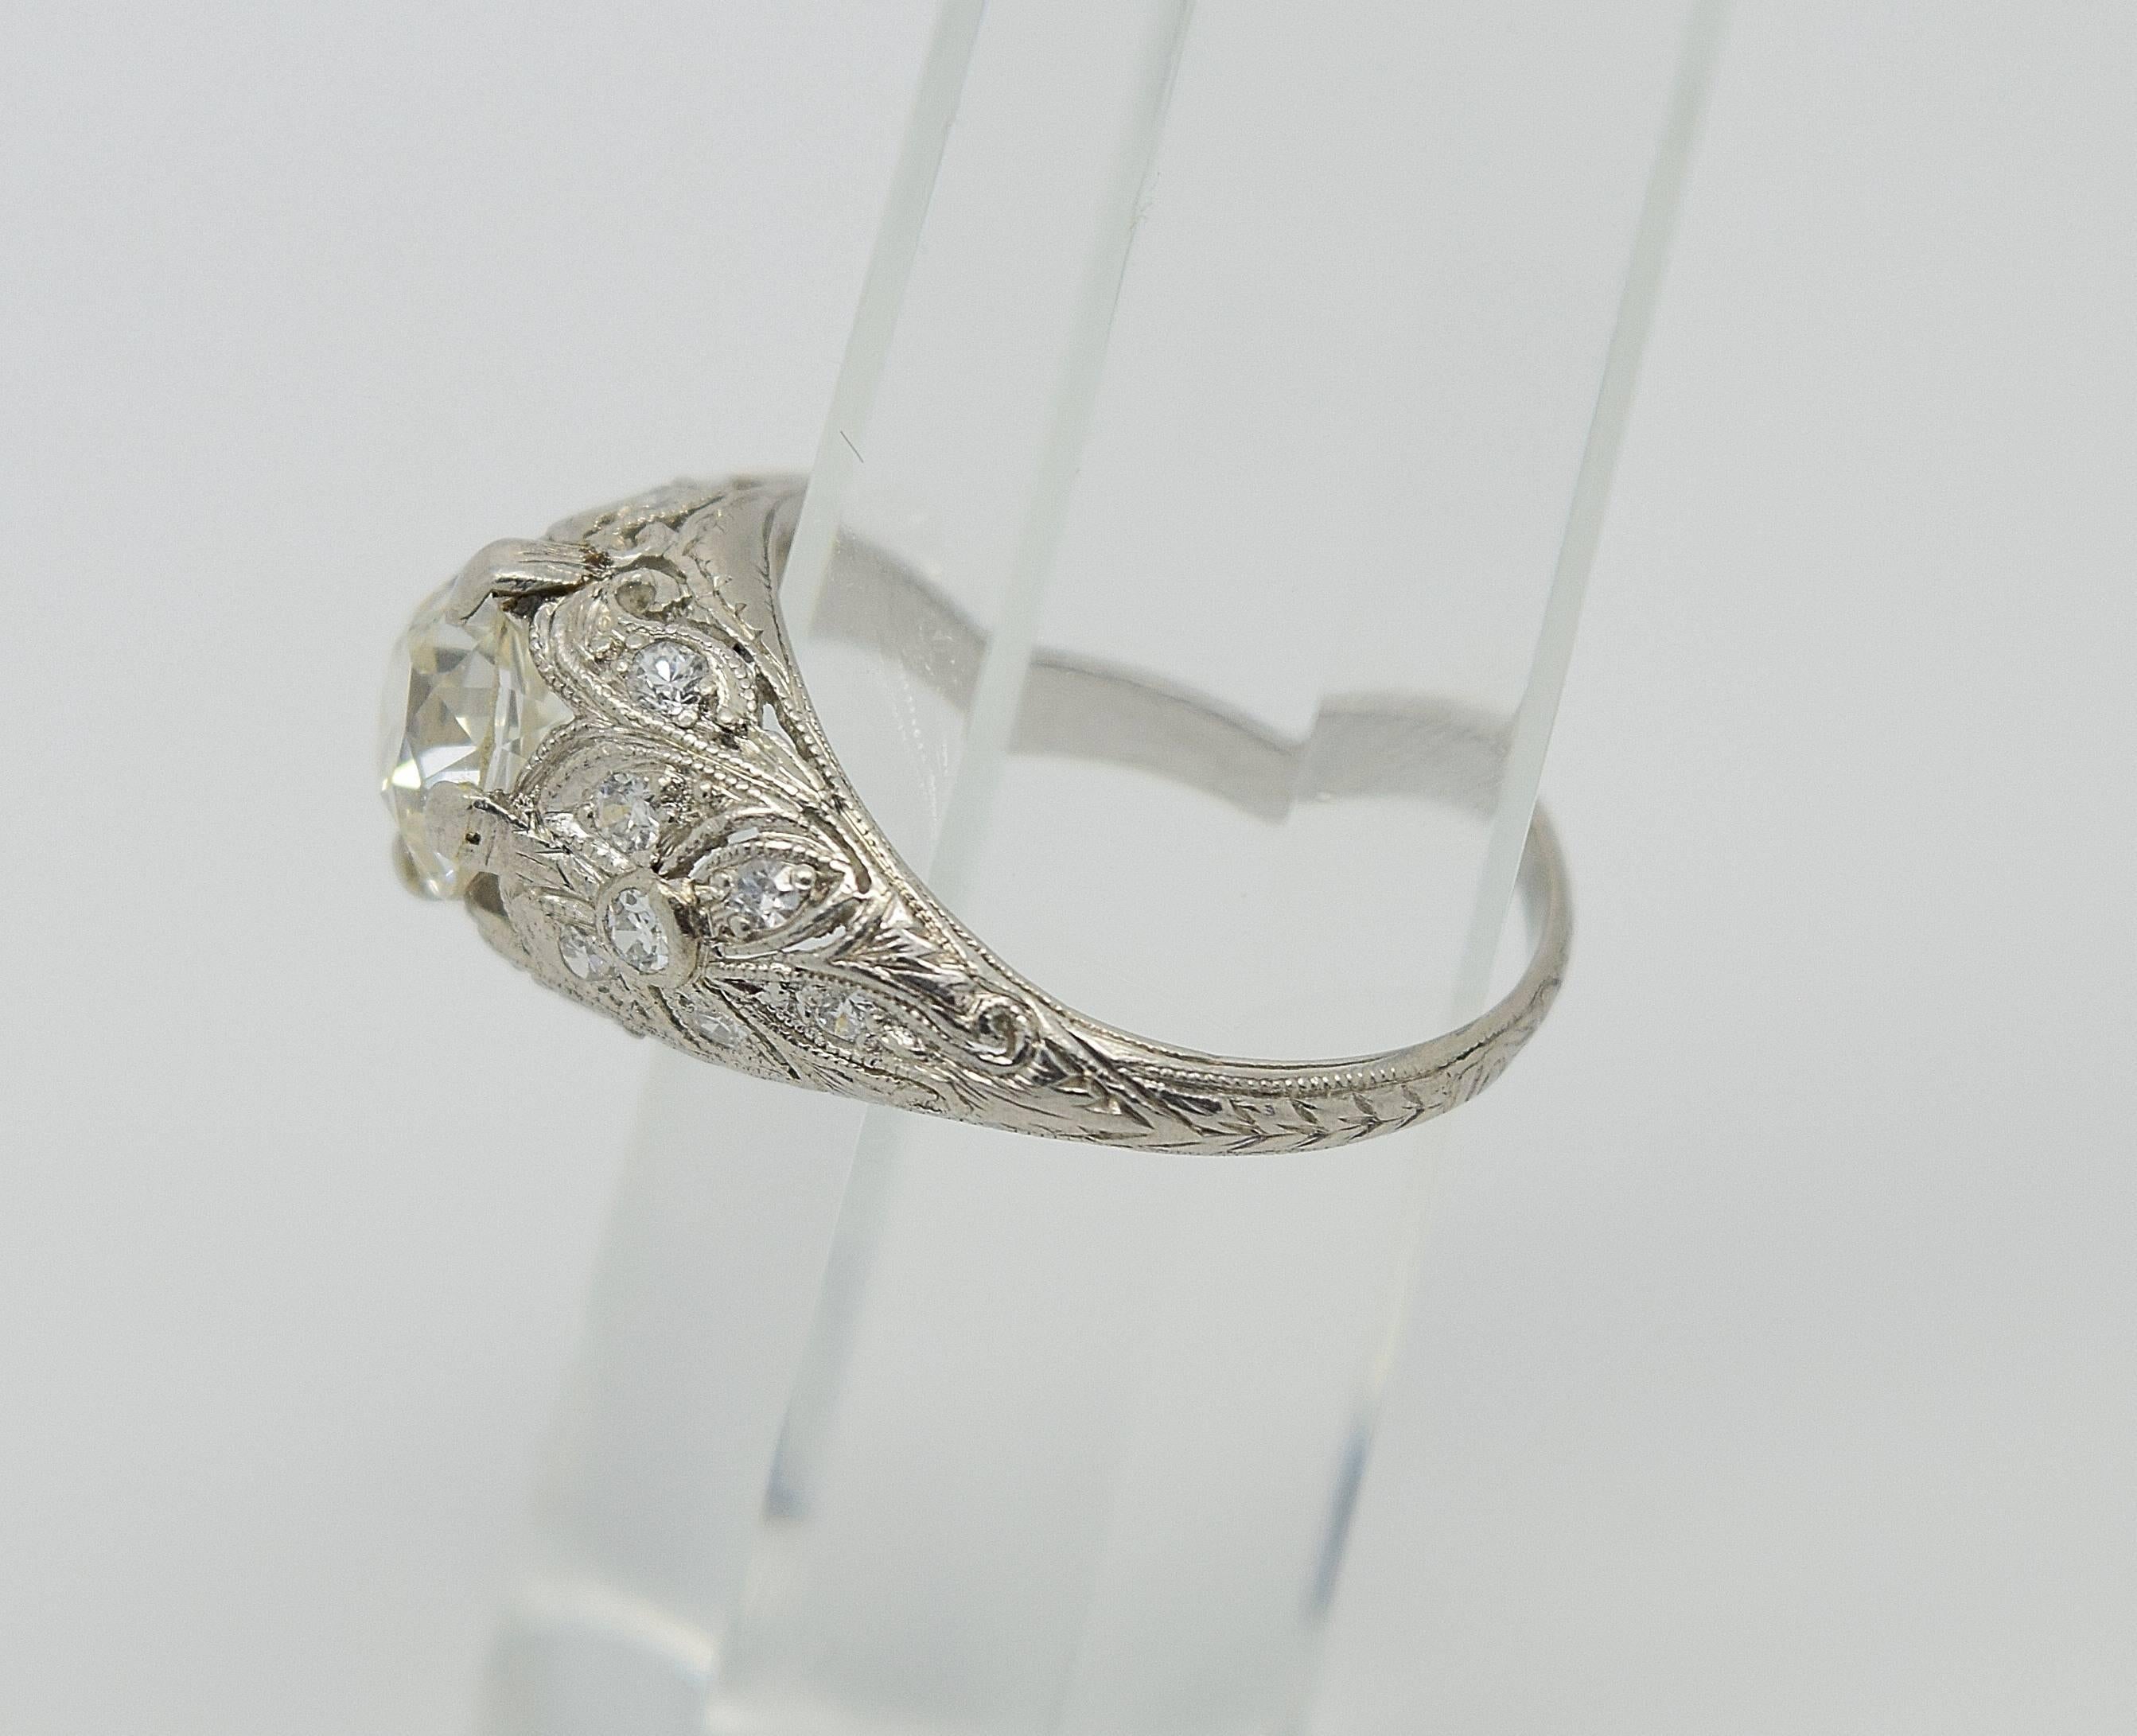 Intricate Art Deco Old European cut diamond ring set in platinum. The center diamond is approximately 1.20ct and is I/J color and VS clarity. The ring has fantastic filigree and miligrain design and is a very desirable engagement ring style. The